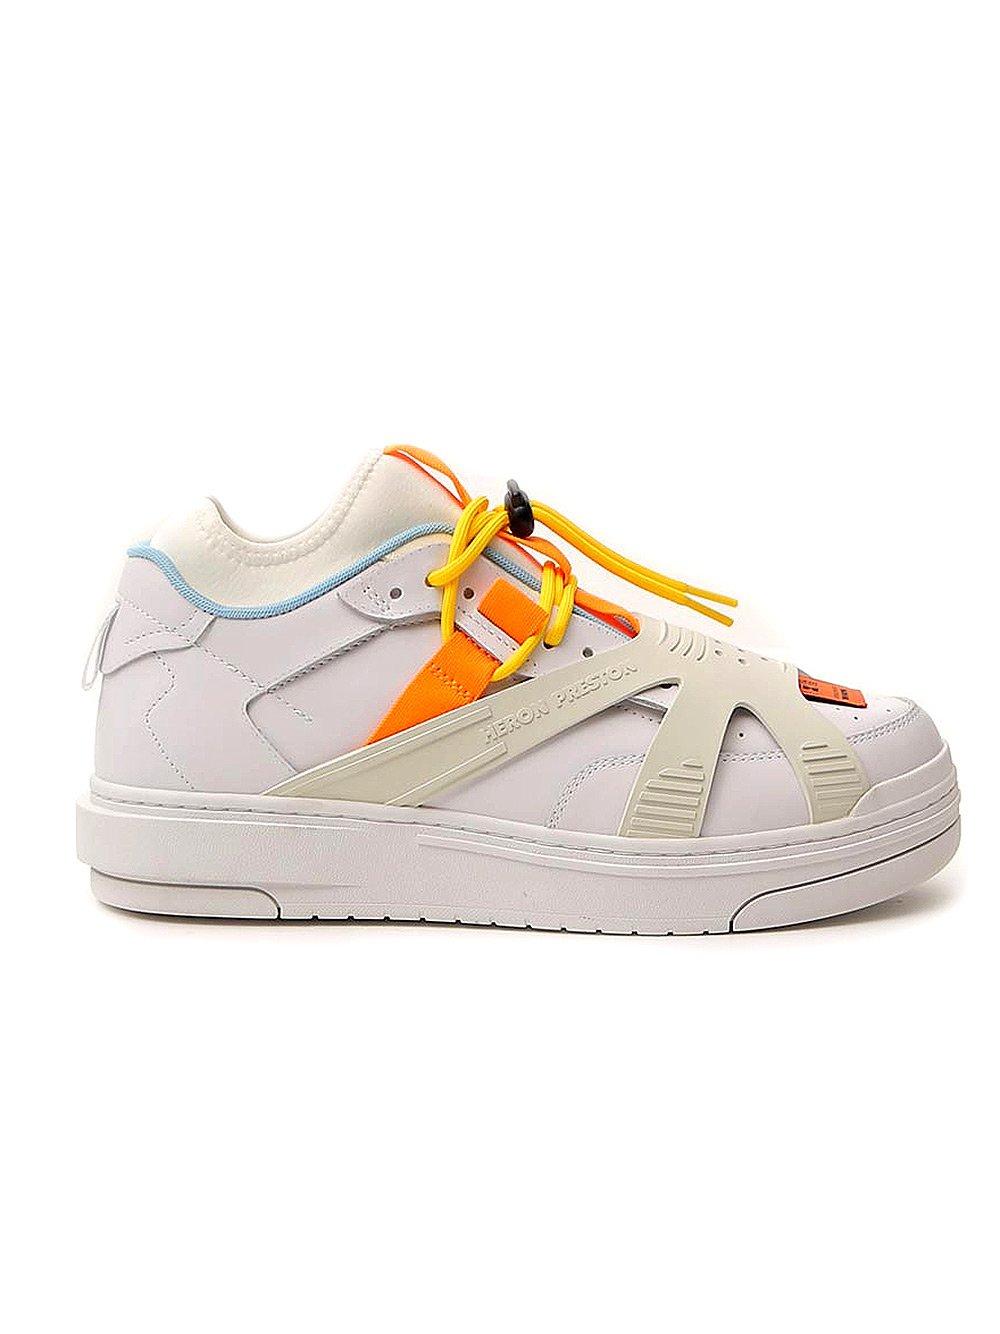 Heron Preston Leather Protection Sneakers in White for Men - Lyst